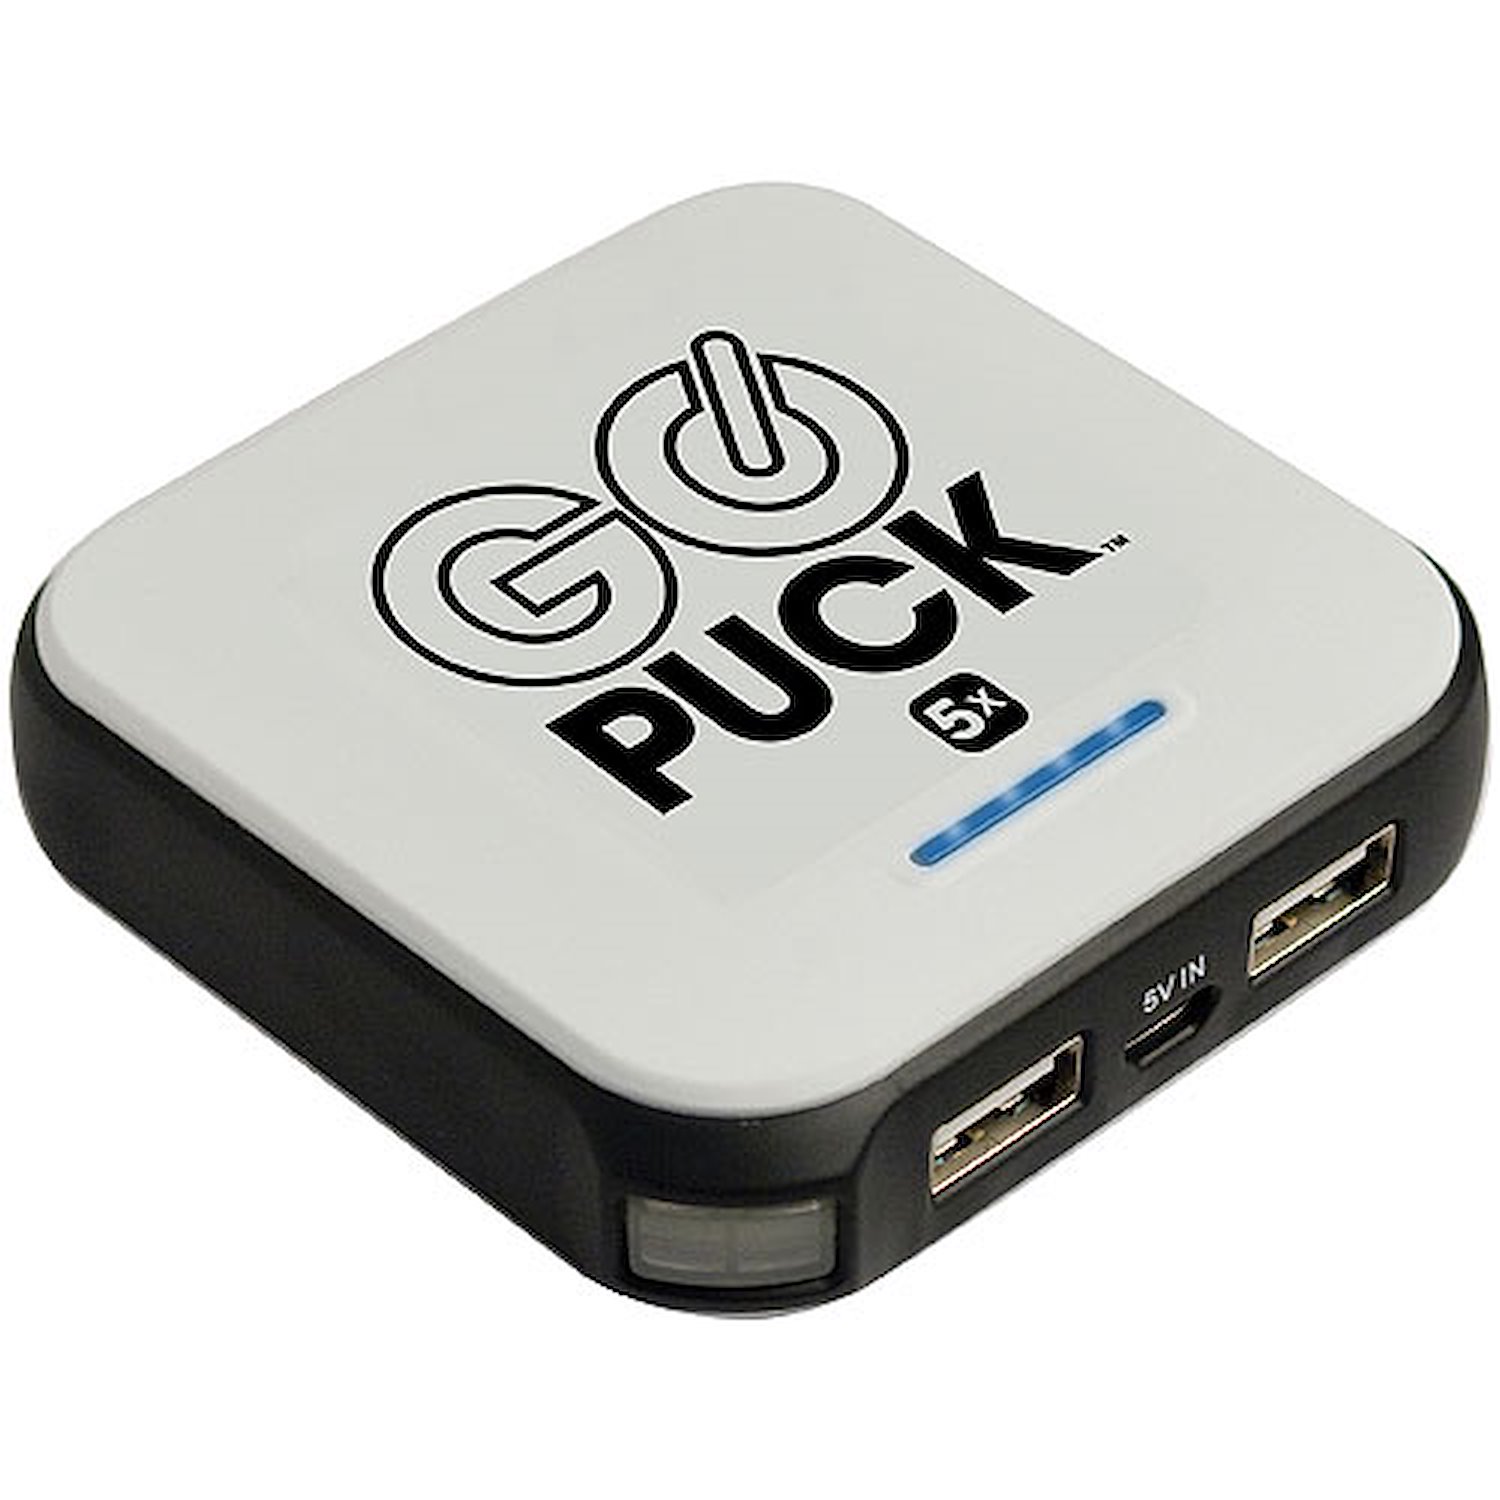 GO PUCK 5x Portable Lithium Ion USB Charger 6600 mAh